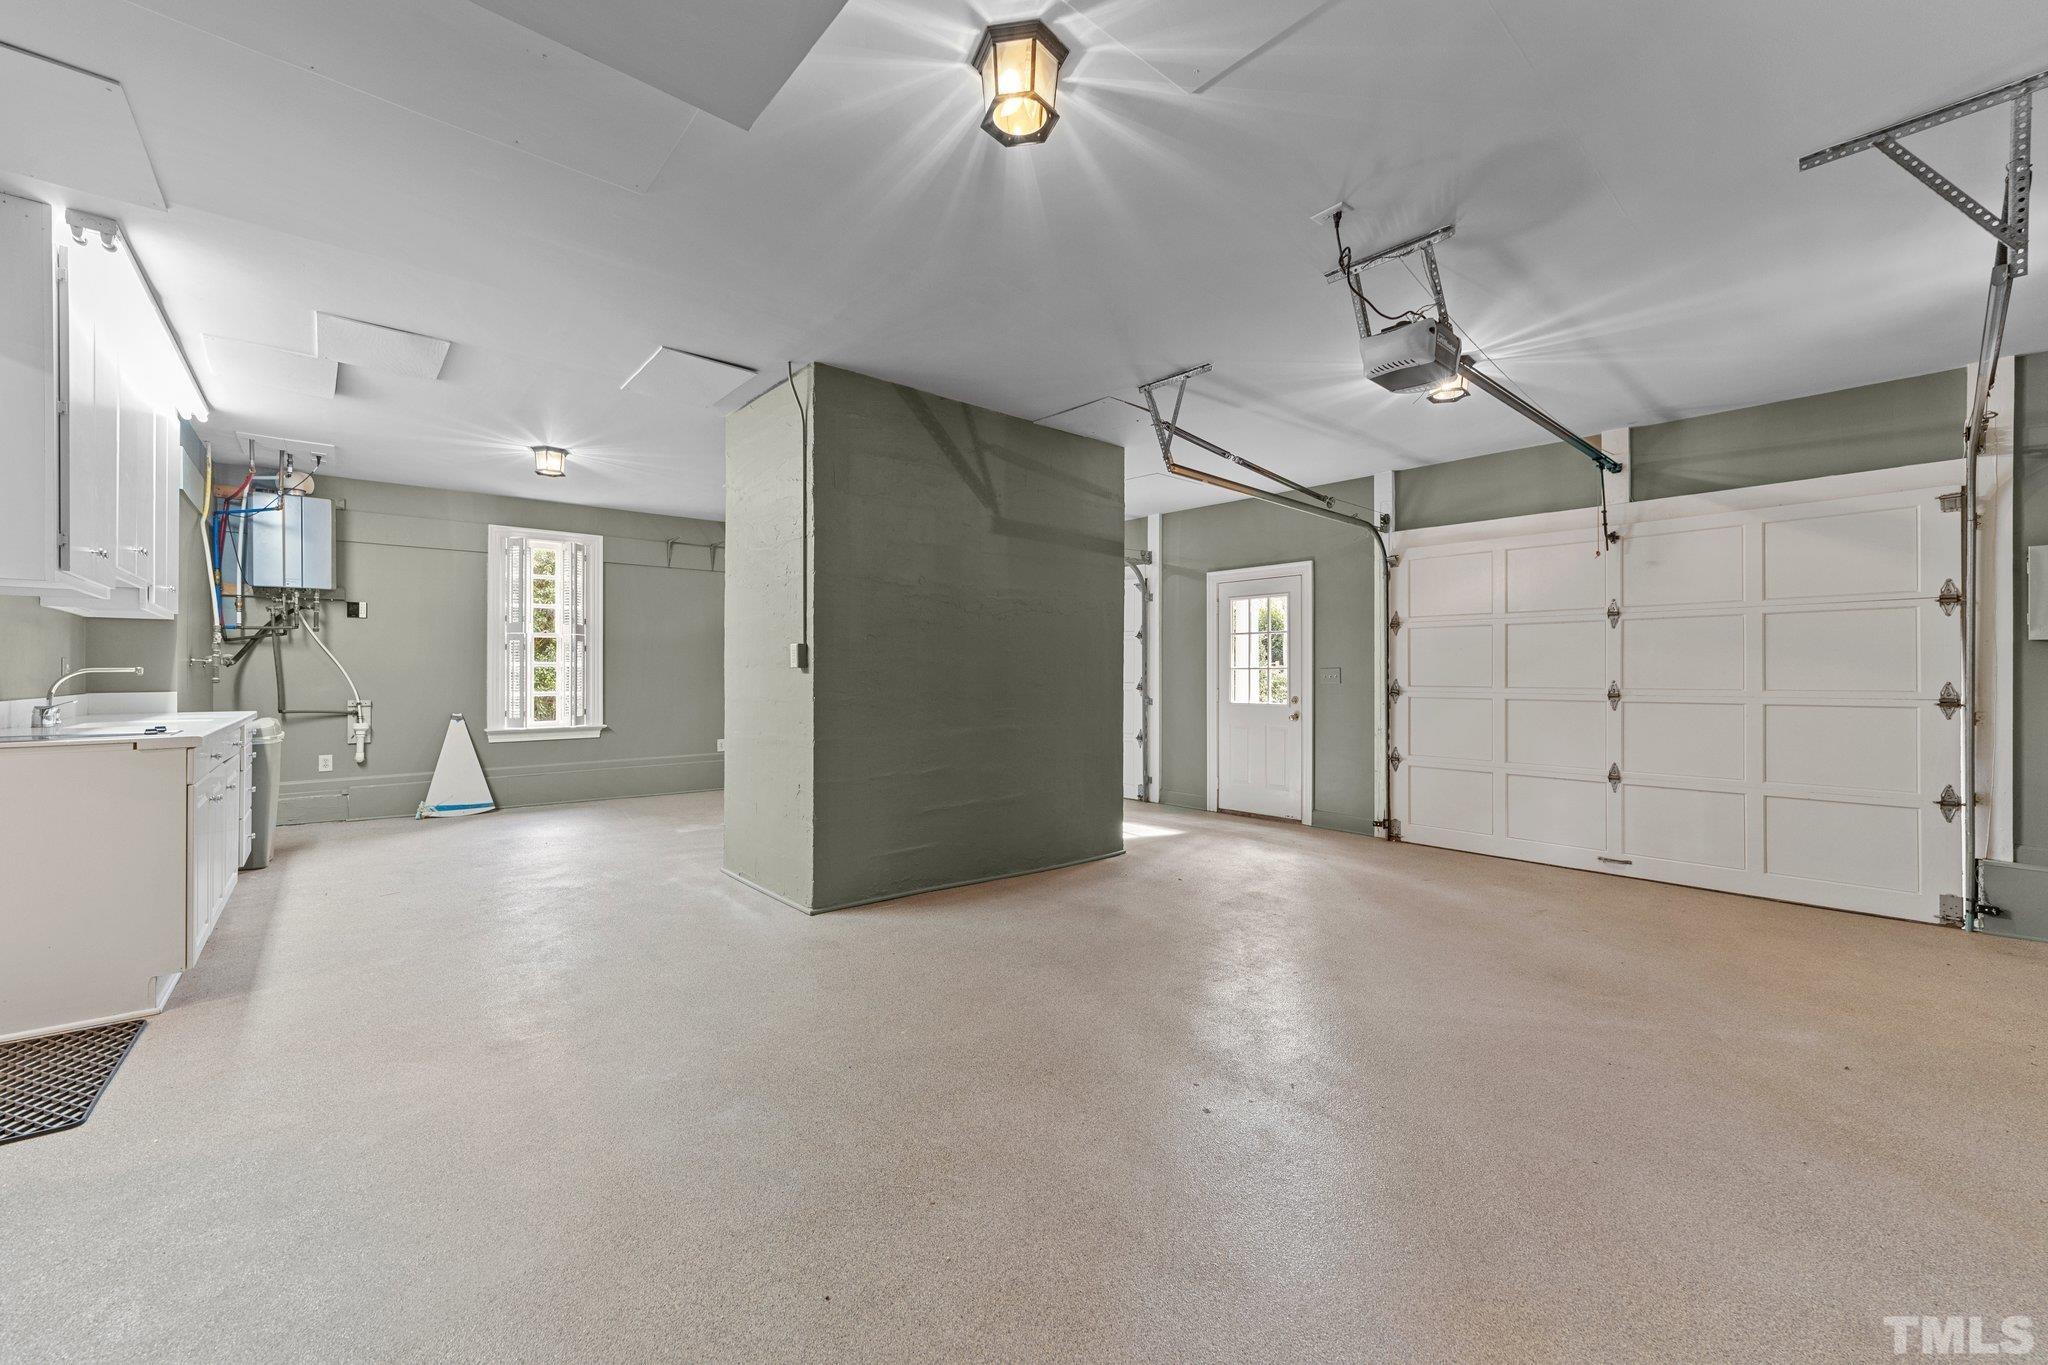 Extra large garage has double bays, apoxy floor, utility access closet and prep counter for caterers or family cooks. Note the 2018 tankless water heater!